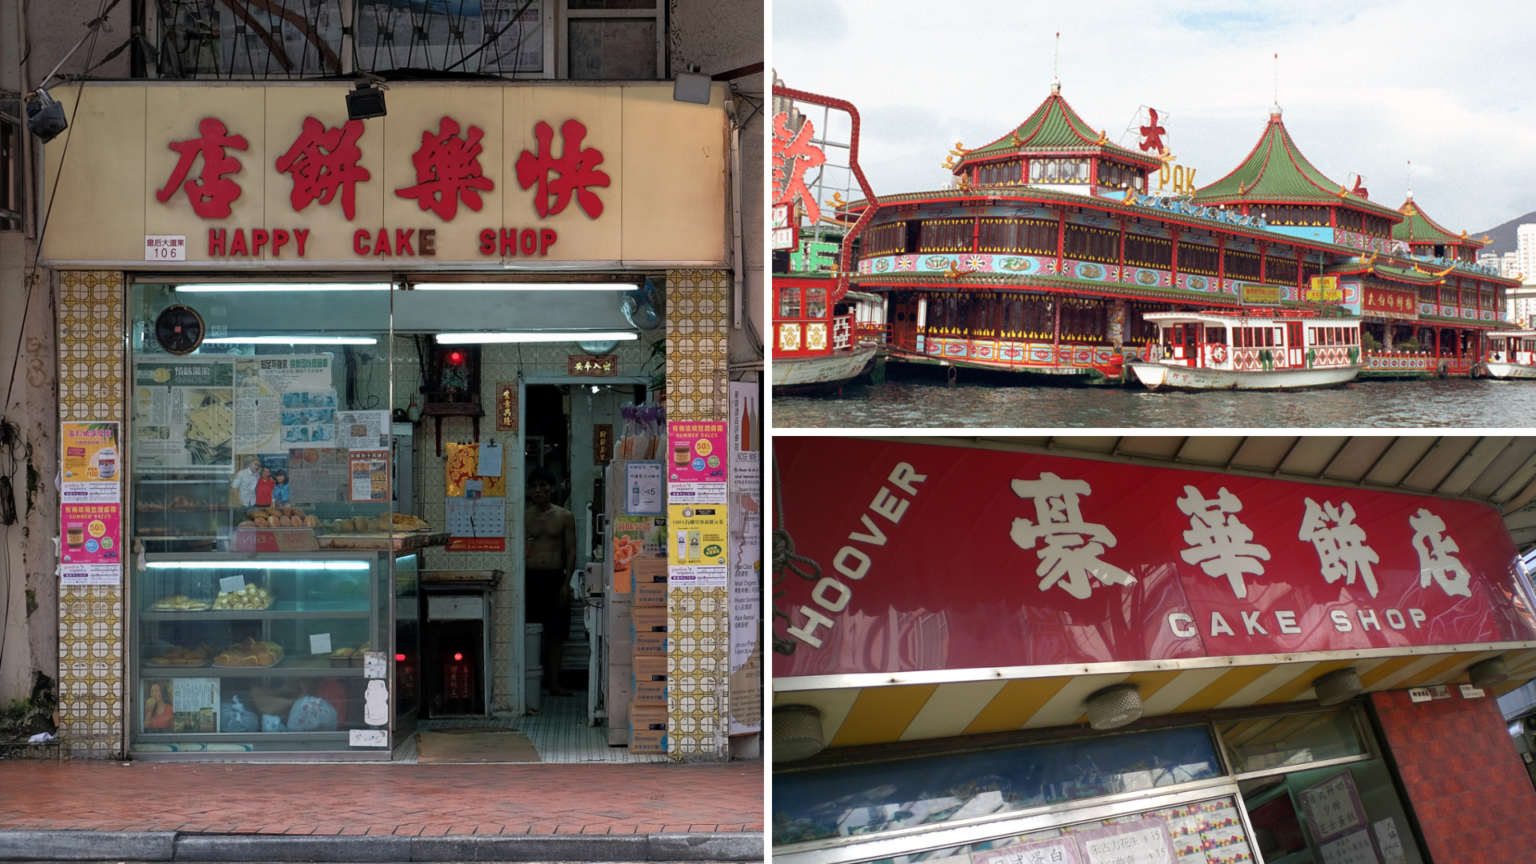 Happy Cake Shop Tai Pak Floating Restaurant Hoover Cake Shop To Reopen